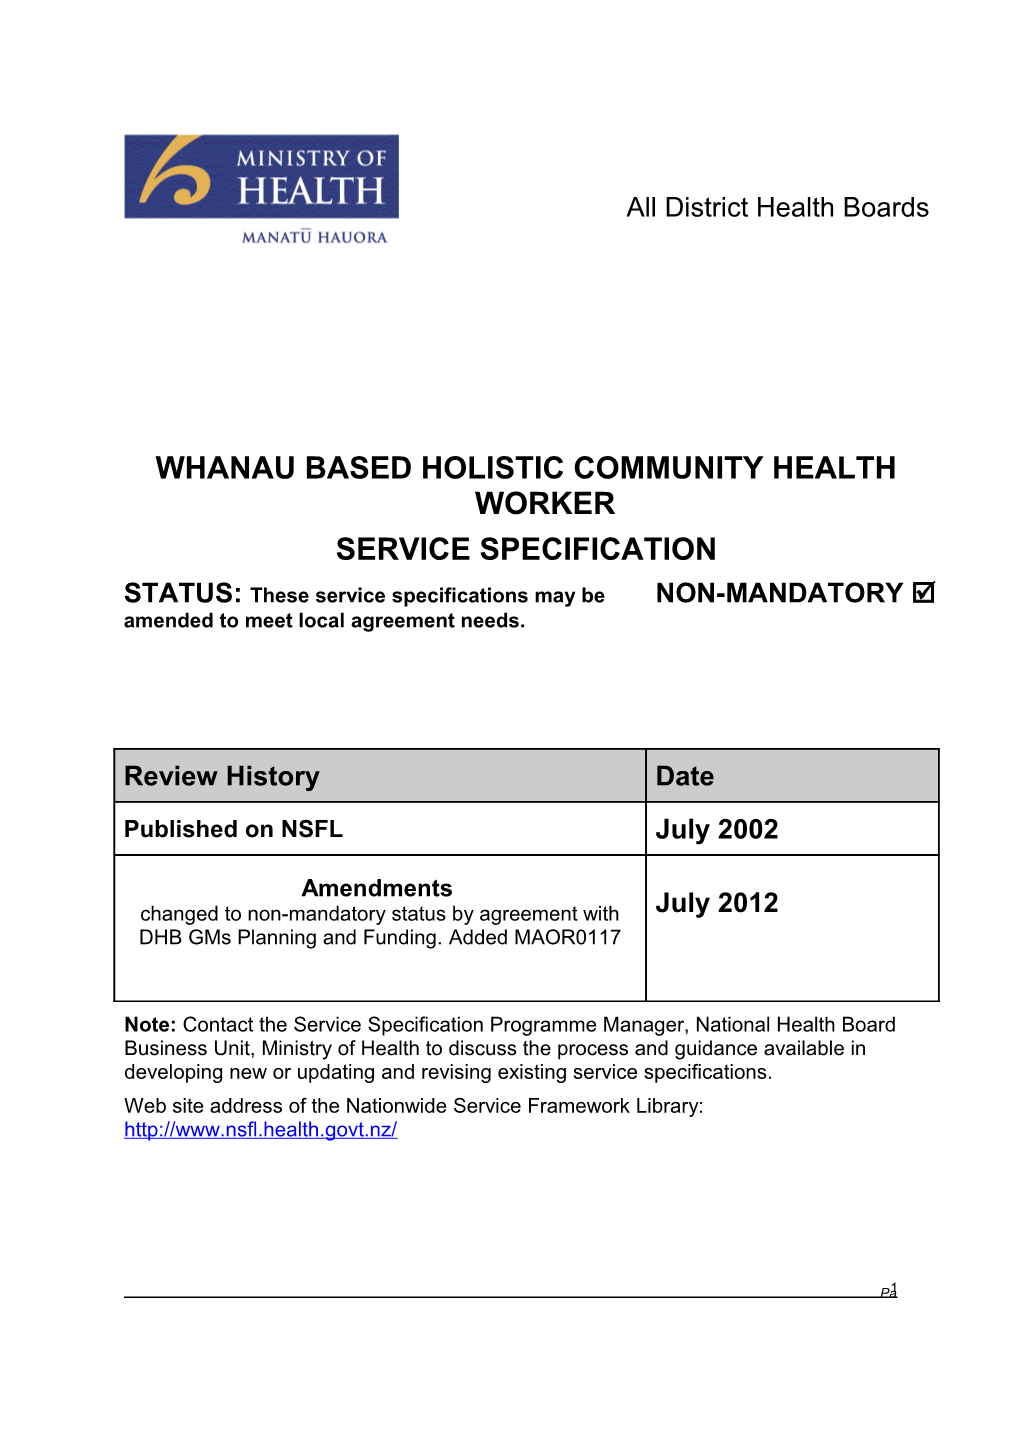 Community Health Education and Promotion and Support Services